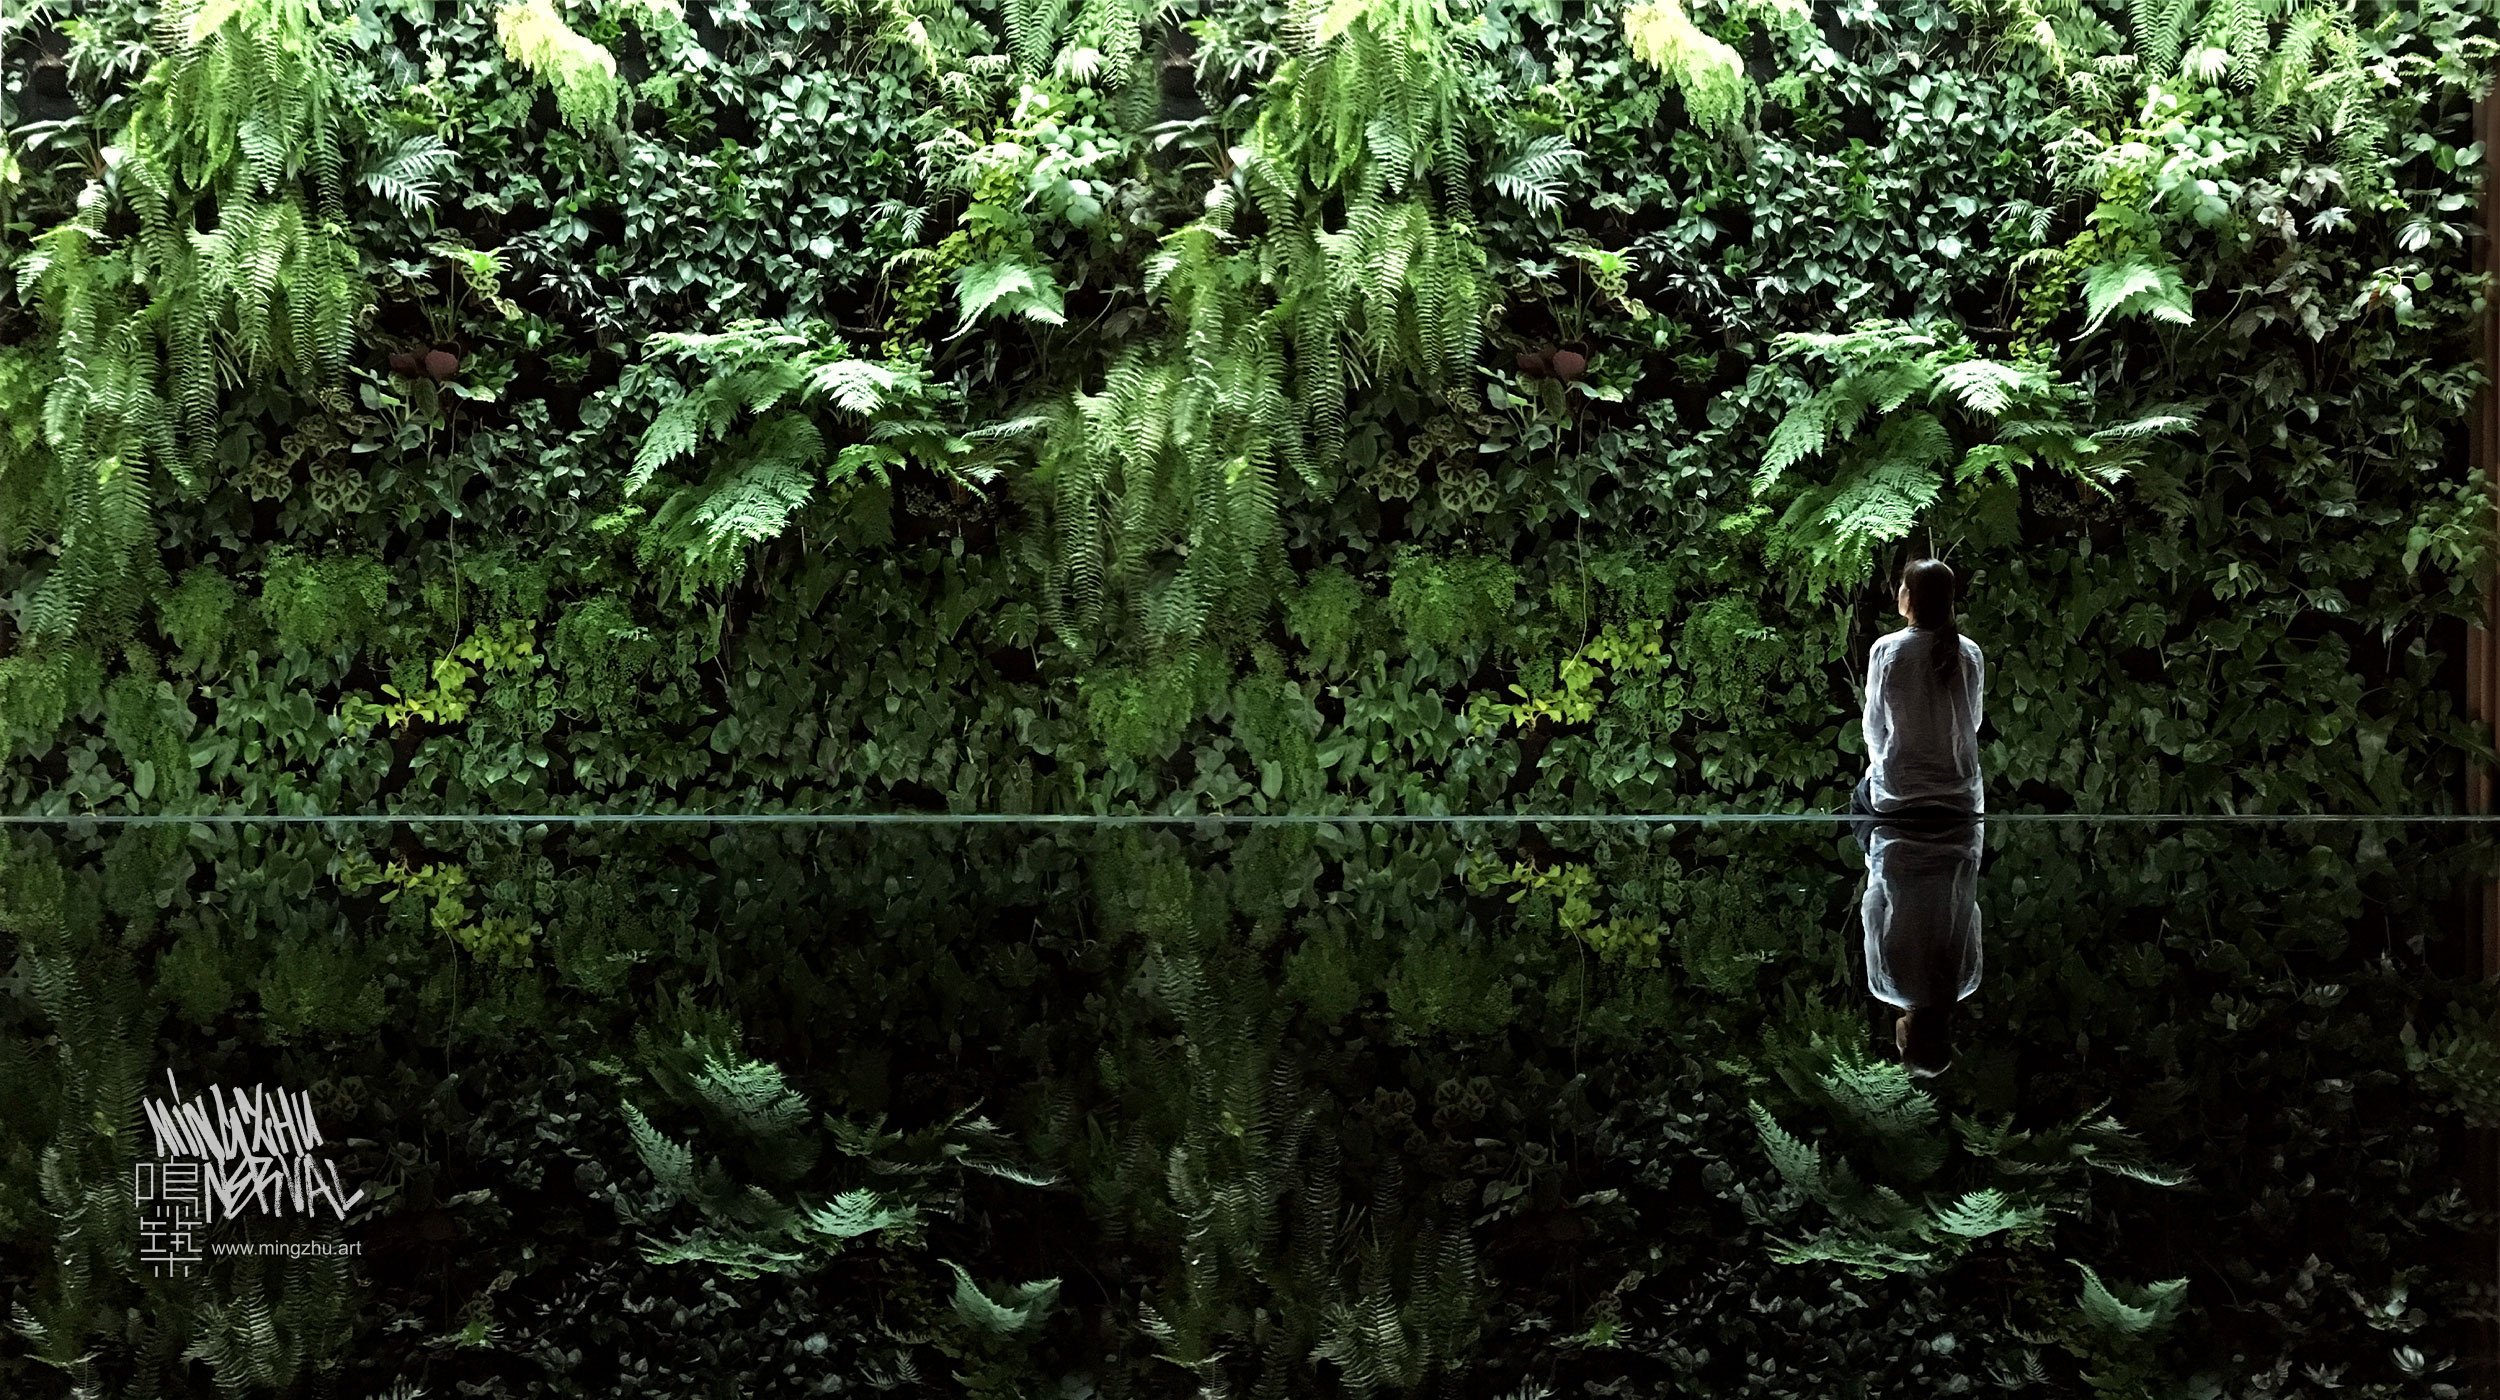 Mingzhu Nerval, amazed by this exceptional vertical garden; nature & forest bathing in the city